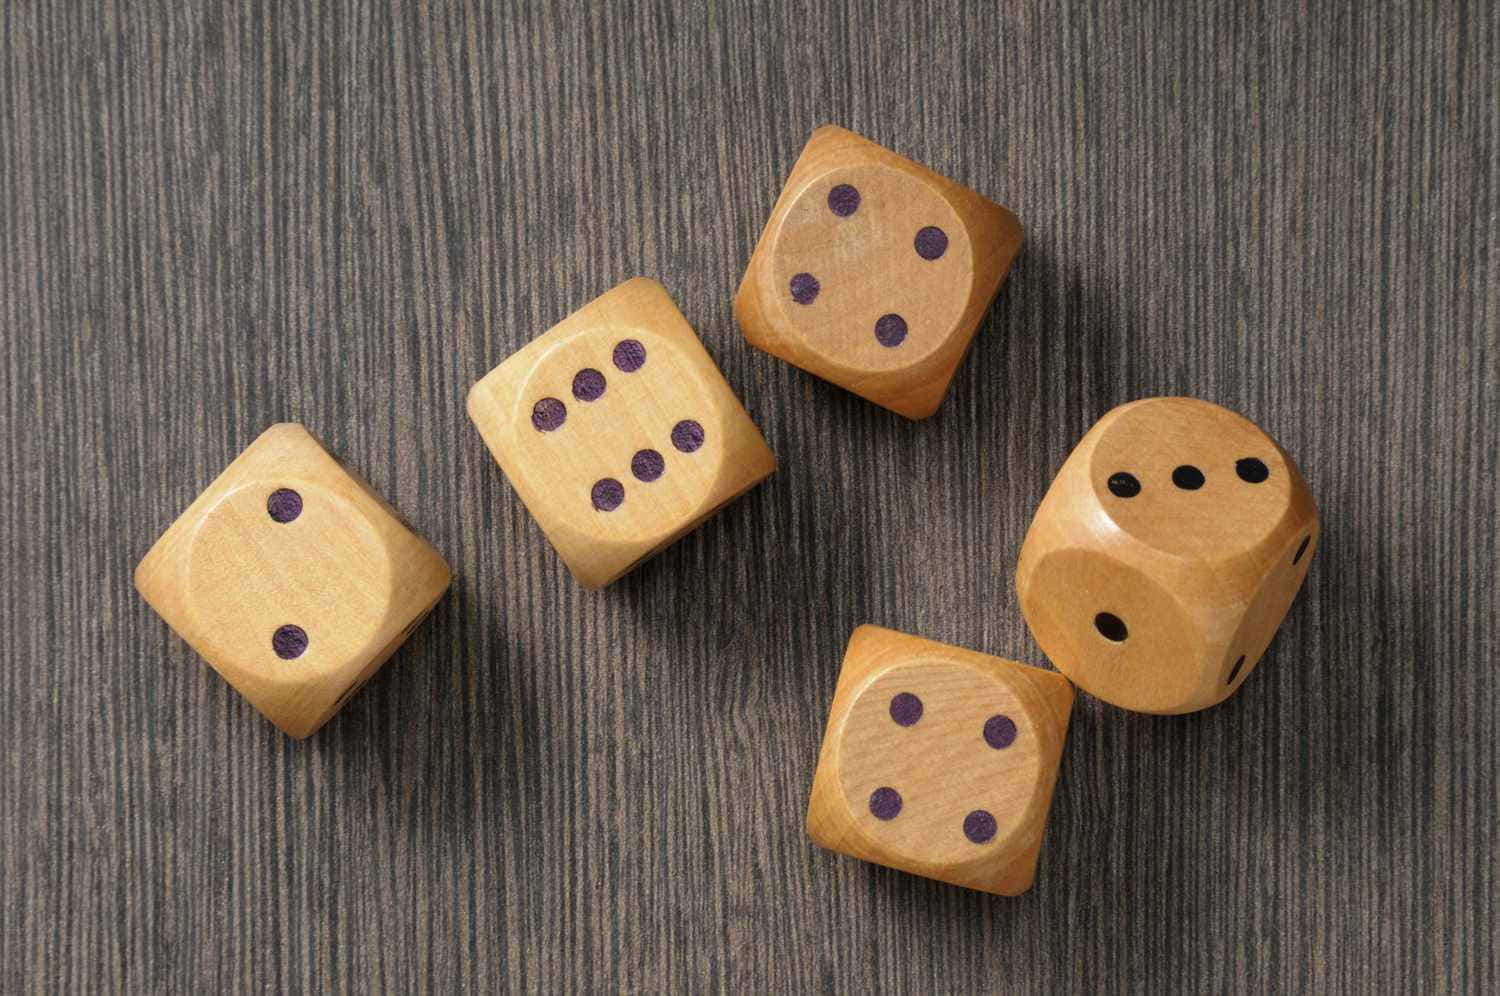 Wooden Dice On A Wooden Table